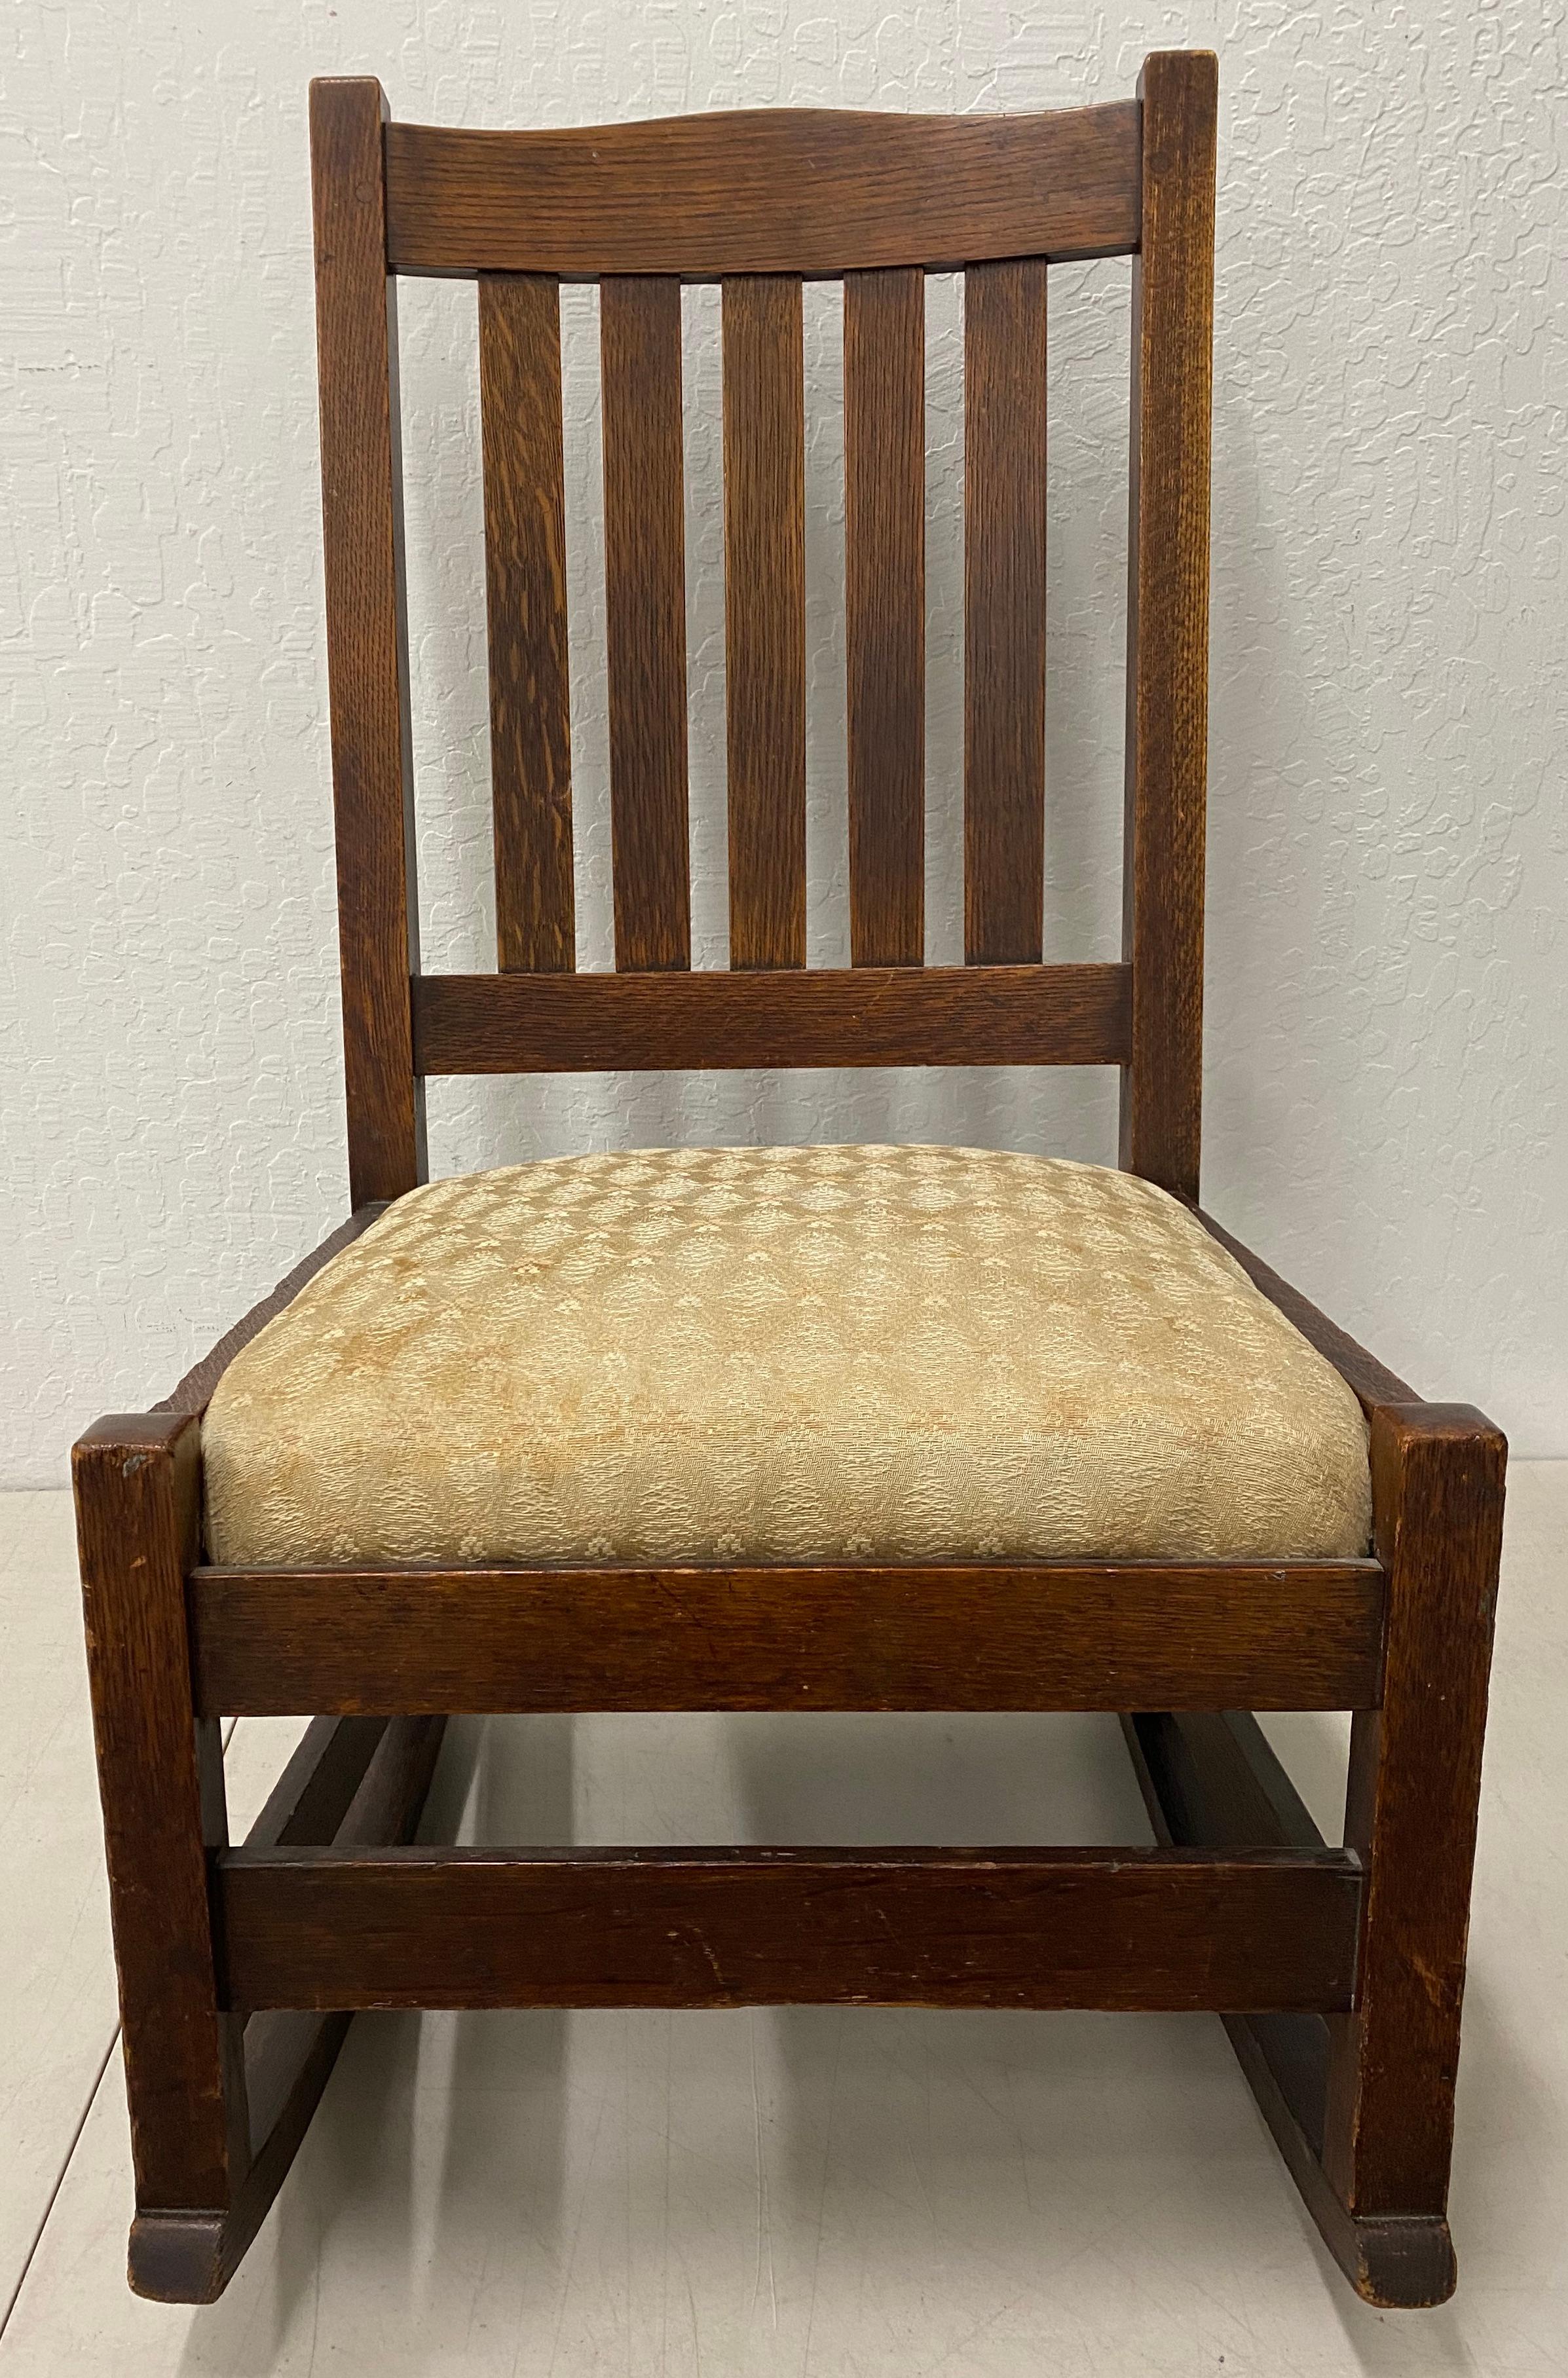 Early 20th century Stickley mission oak rocking chair, circa 1910

Solid and comfortable chair. Easily remove seat (unscrew) to replace the fabric.

Dimensions 18